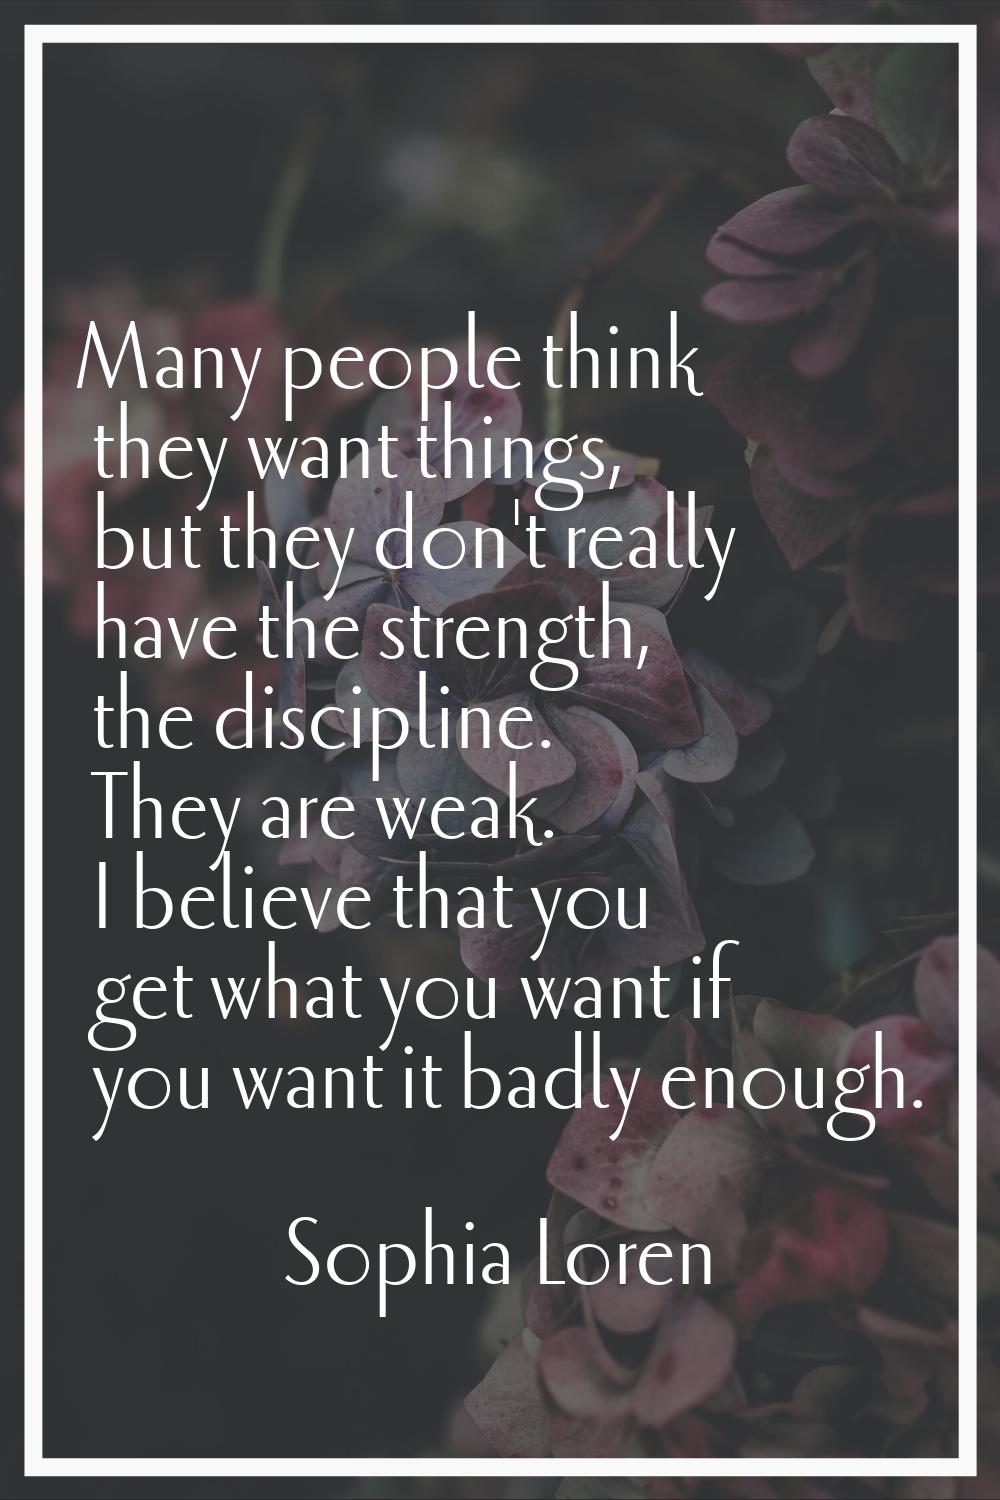 Many people think they want things, but they don't really have the strength, the discipline. They a